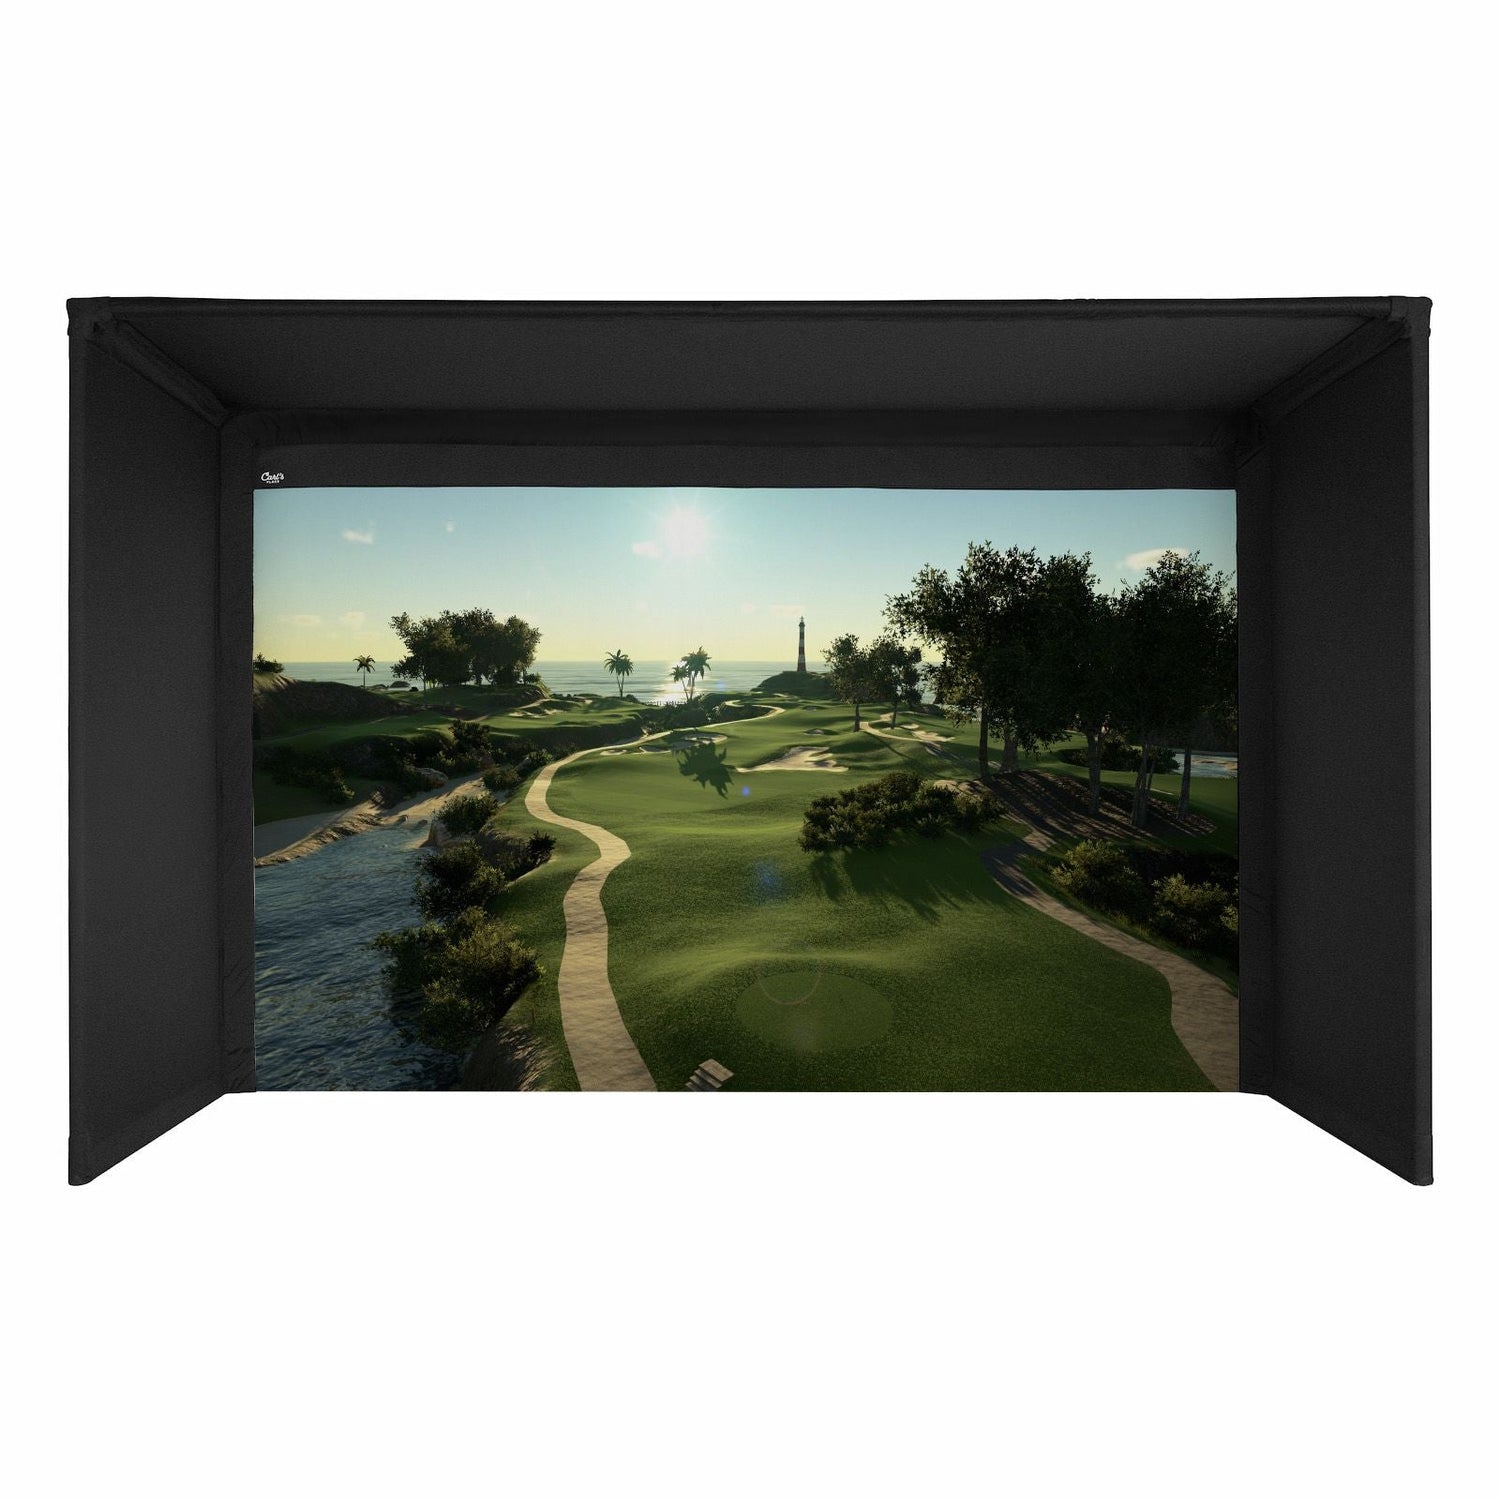 Carl's Place C-Series Pro Golf Simulator Bay with Impact Screen with 15’ Enclosure Depth - Big Horn Golfer